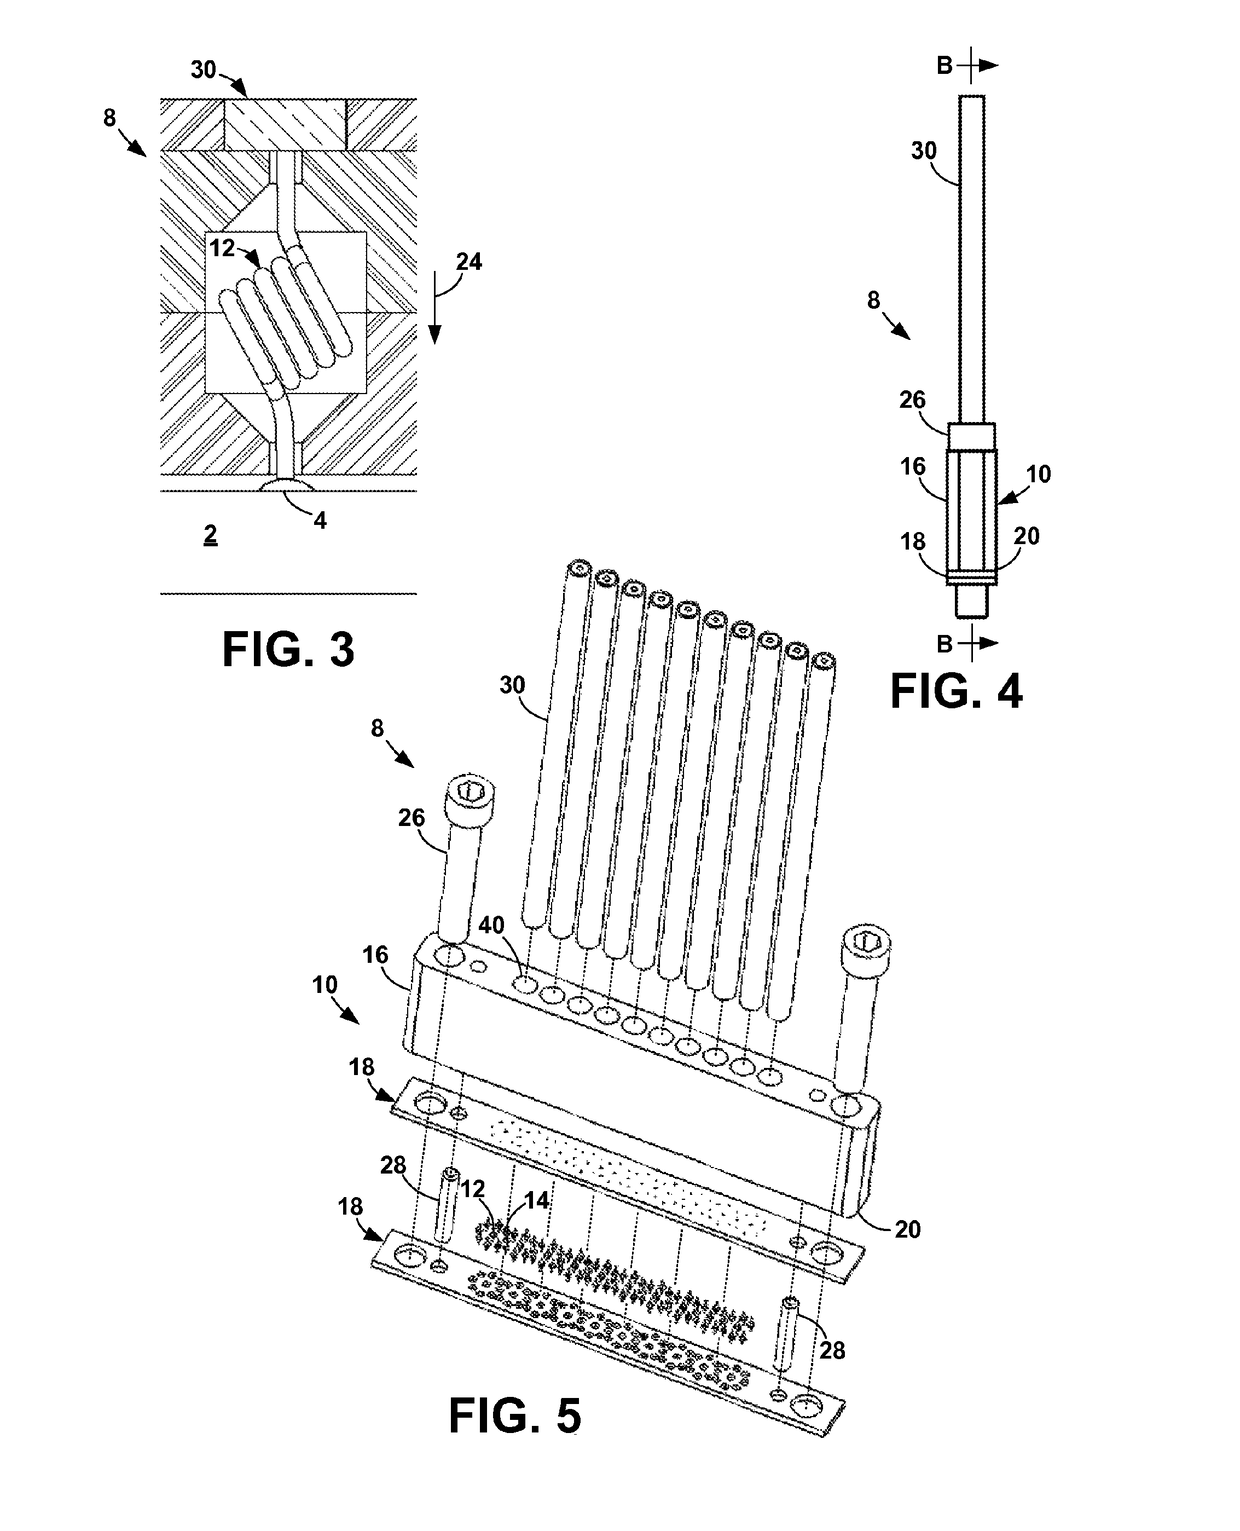 Controlled-impedance cable termination using compliant interconnect elements